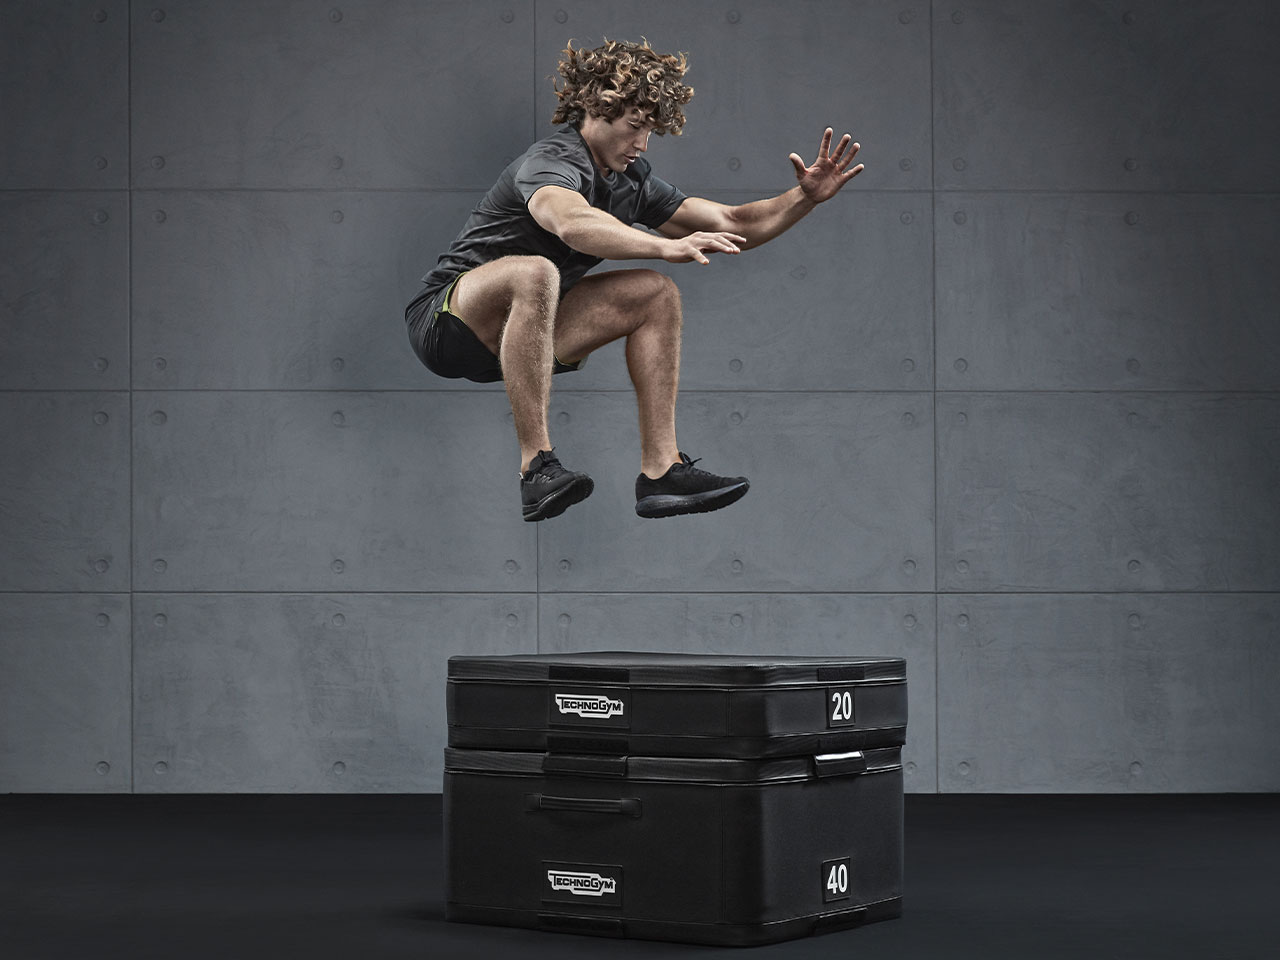 Technogym Plyoboxes: Professional gym boxes for jumping 